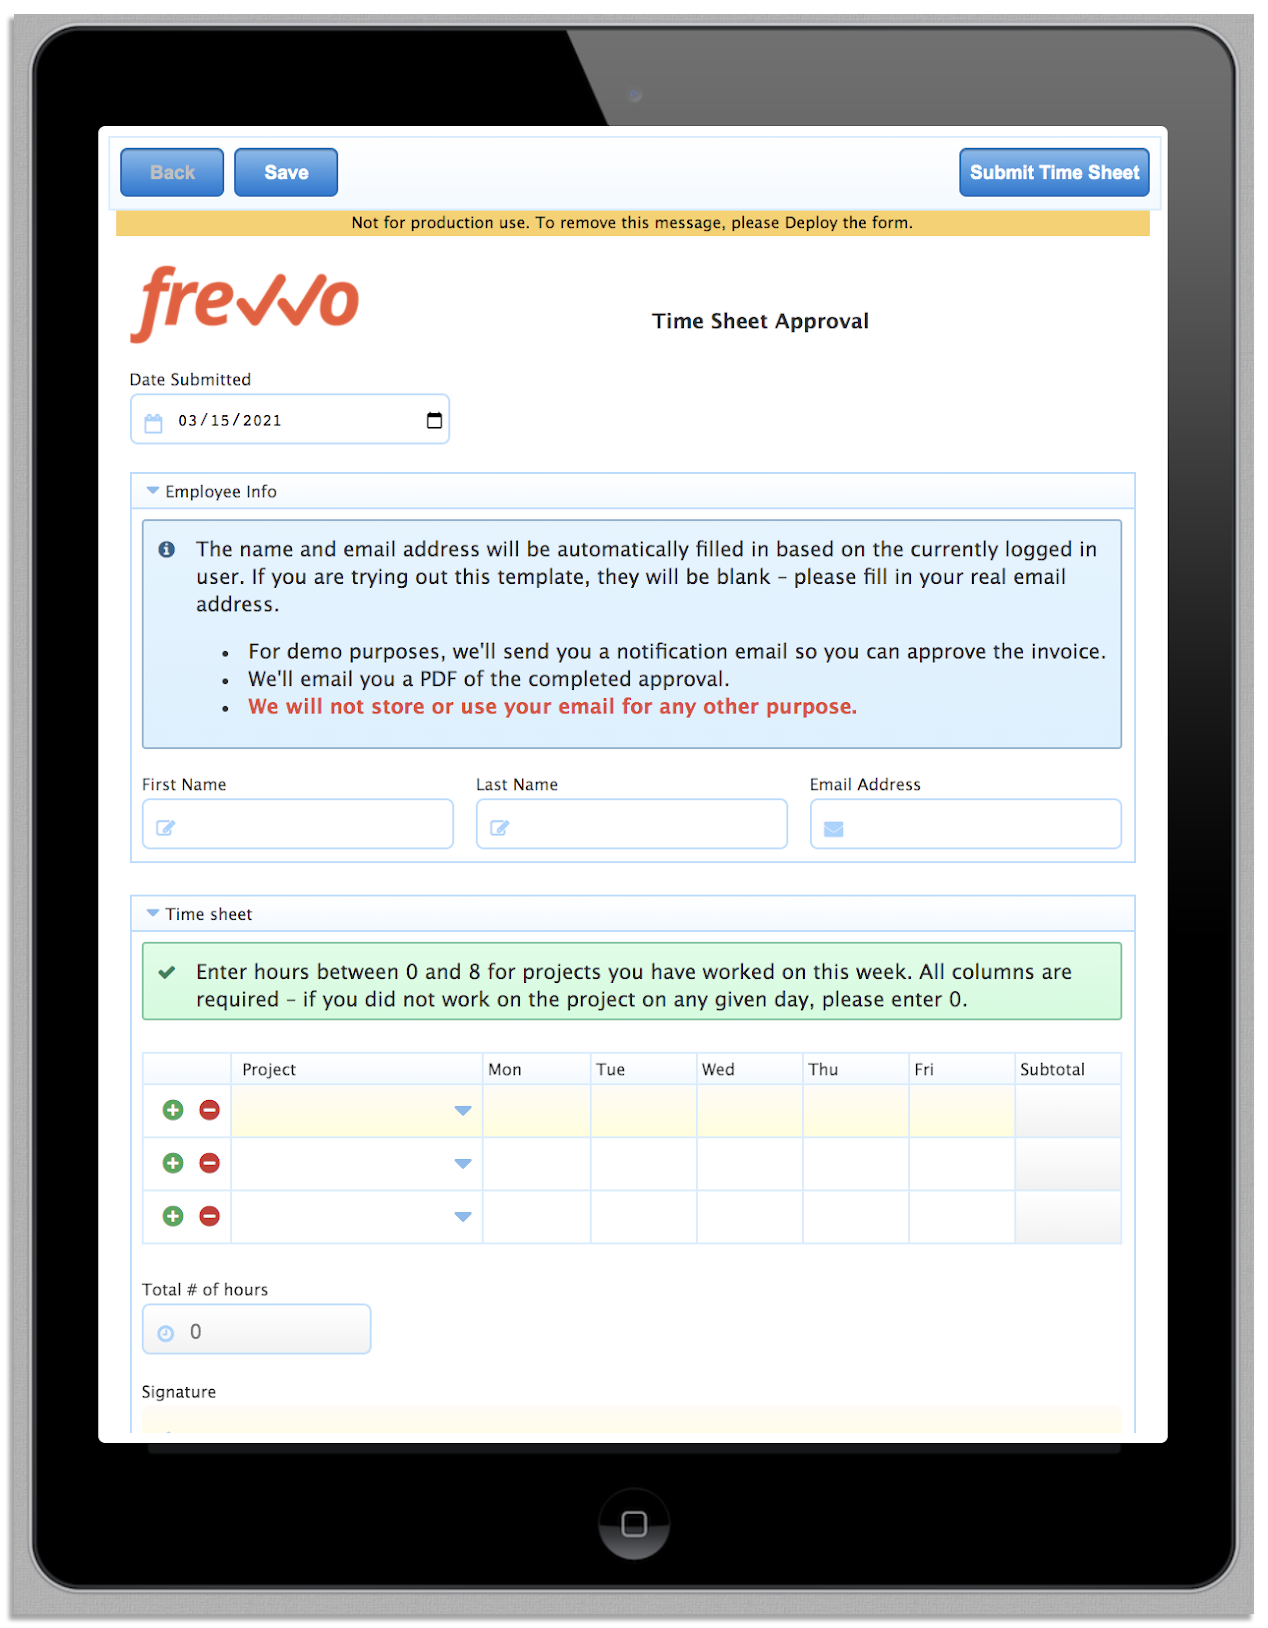 Mobile previews in frevvo's workflow automation software